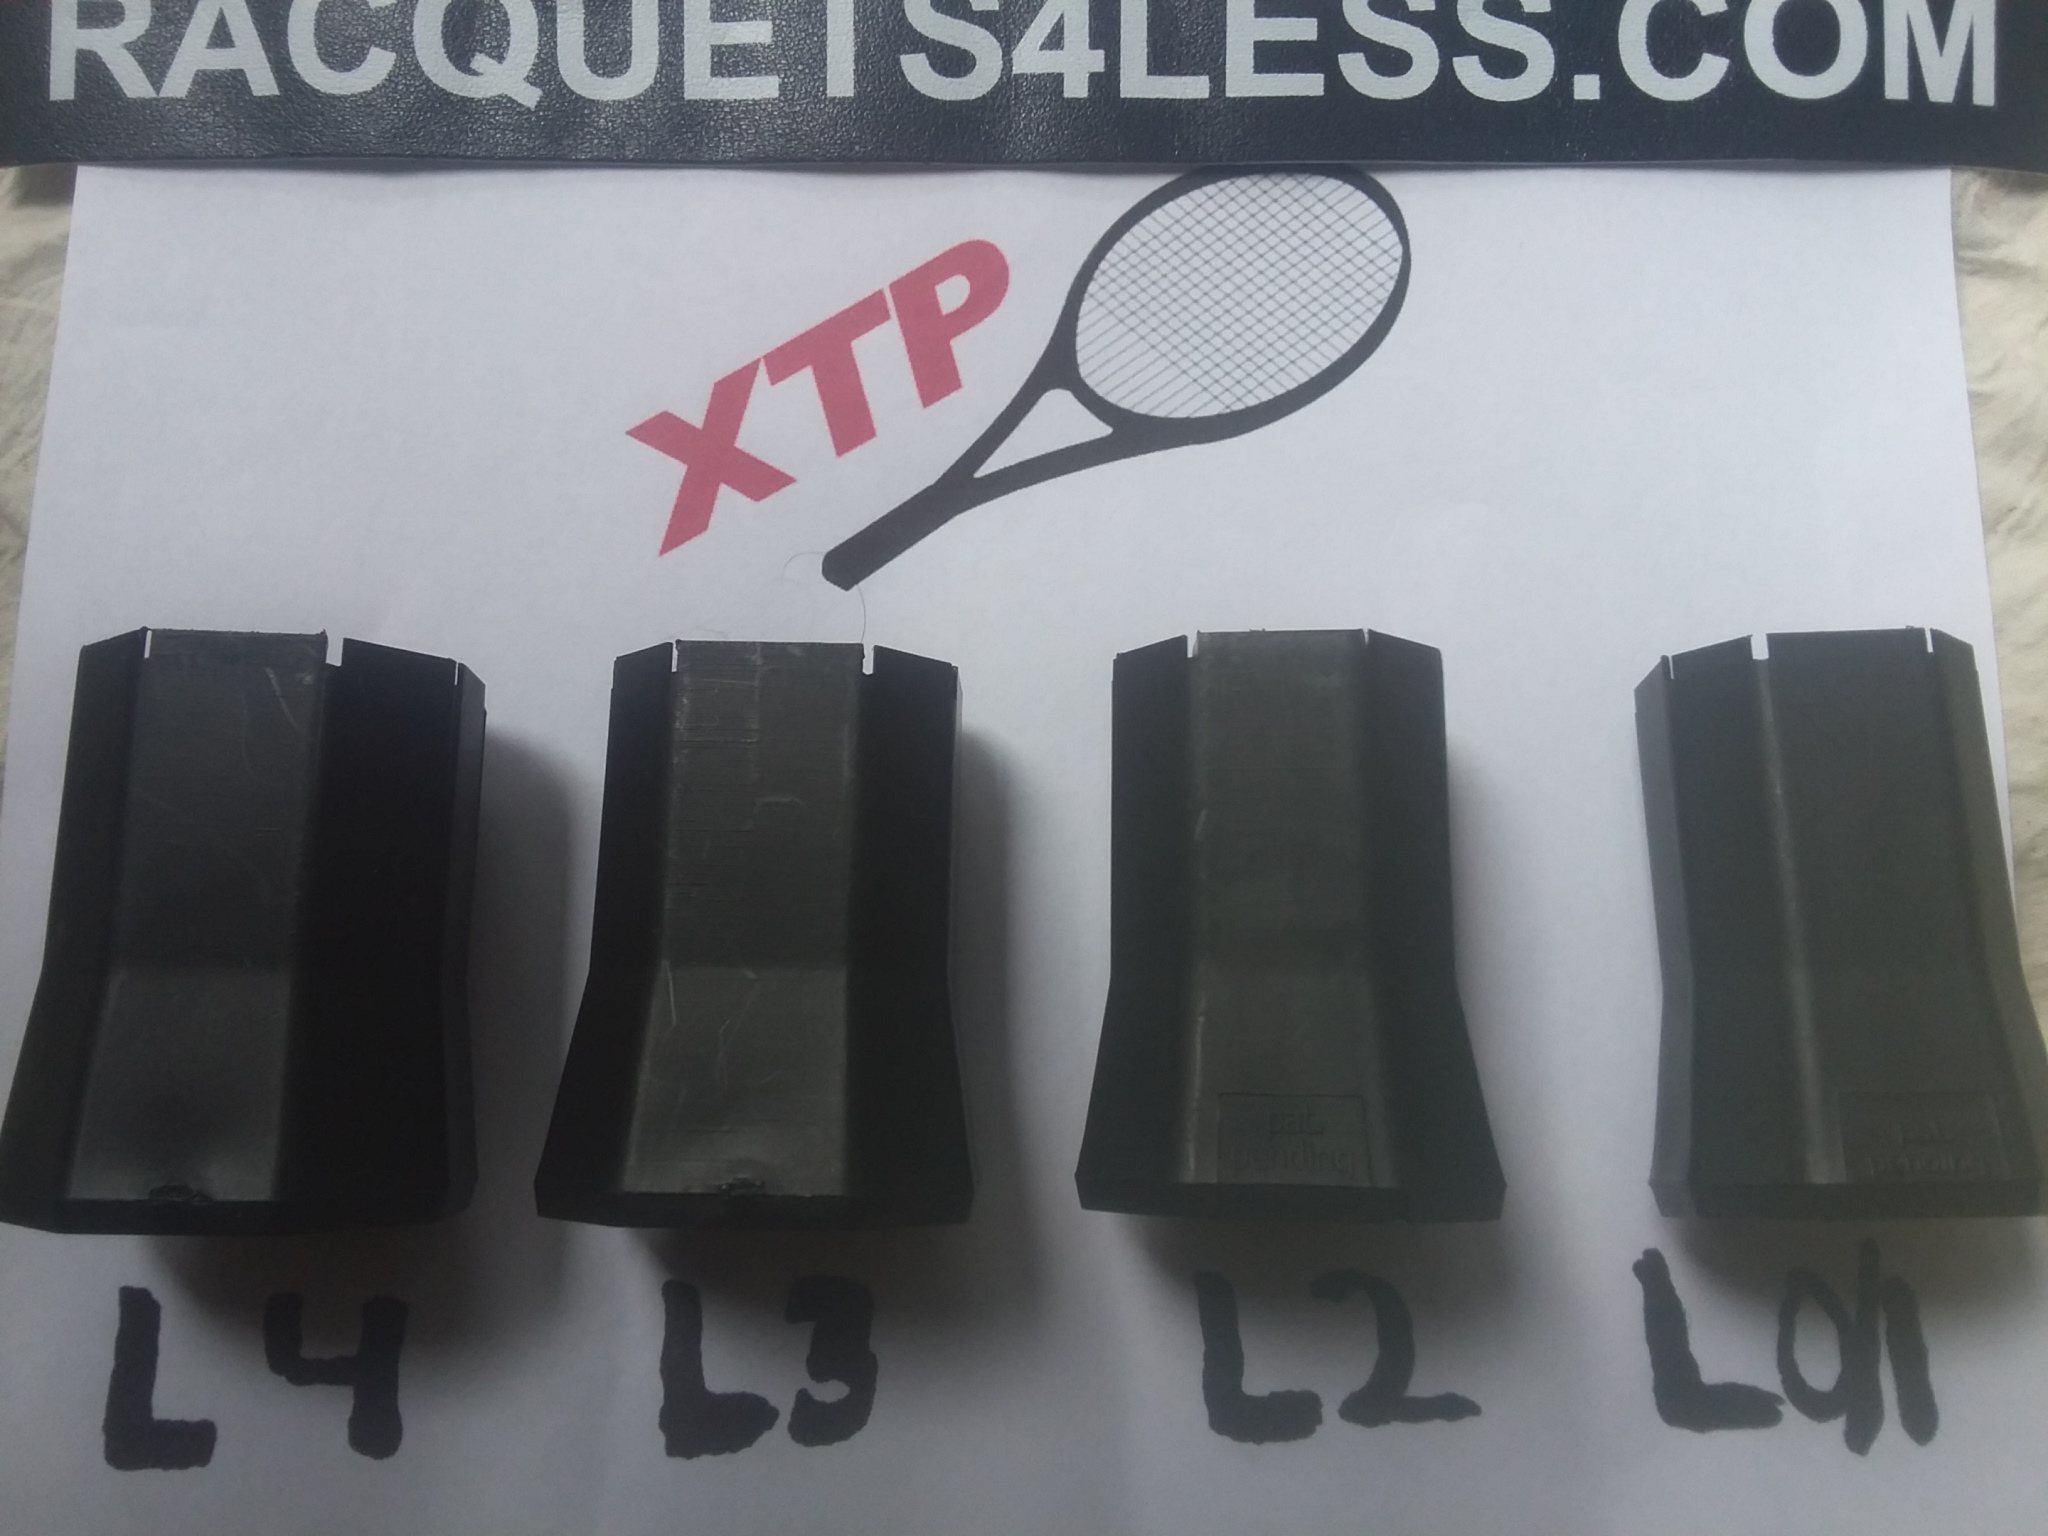 Xtp Xtended Tennis Product